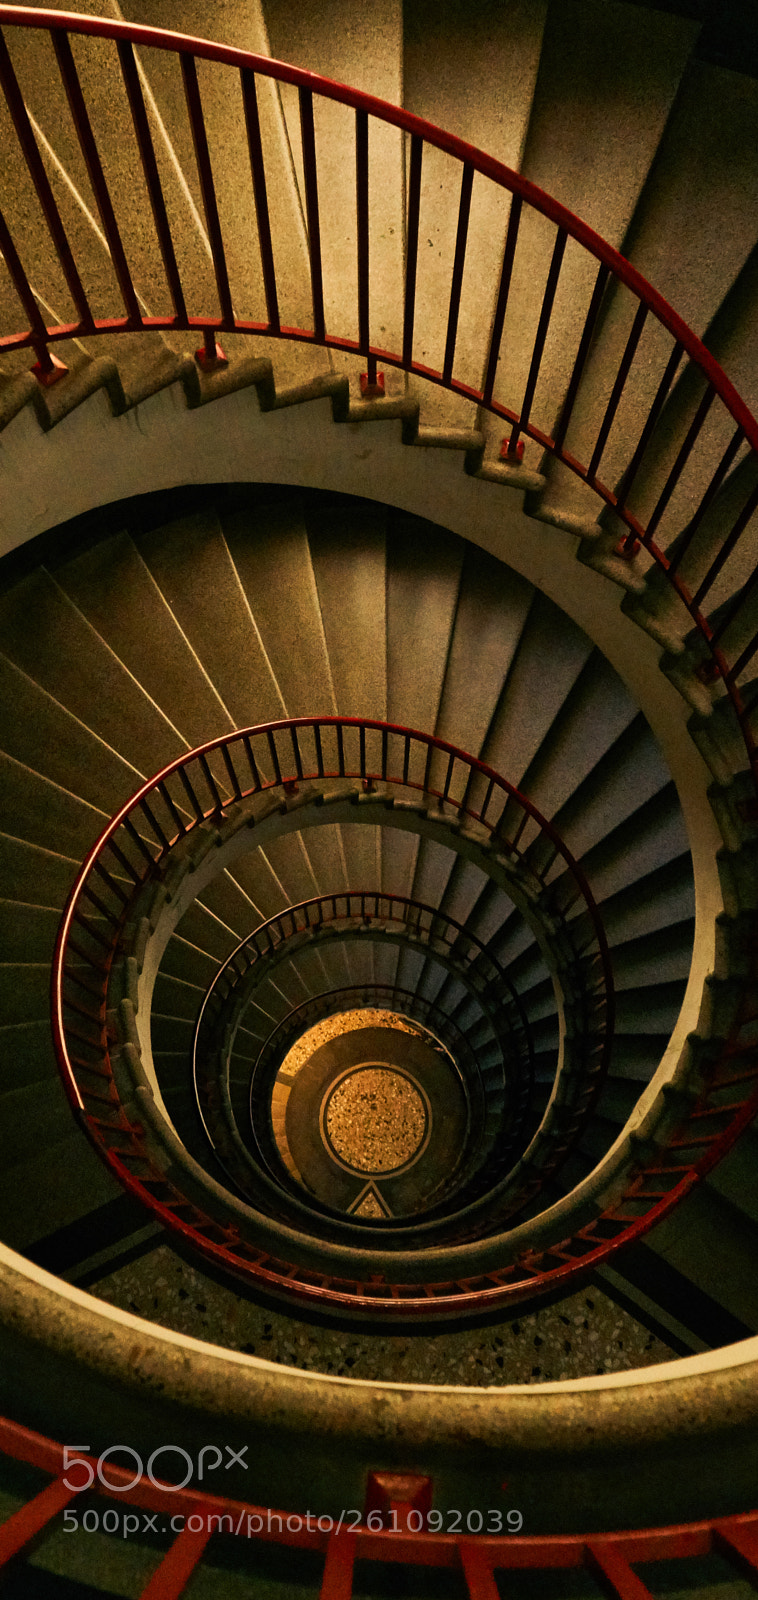 Sony a6300 sample photo. Spiral staircase photography